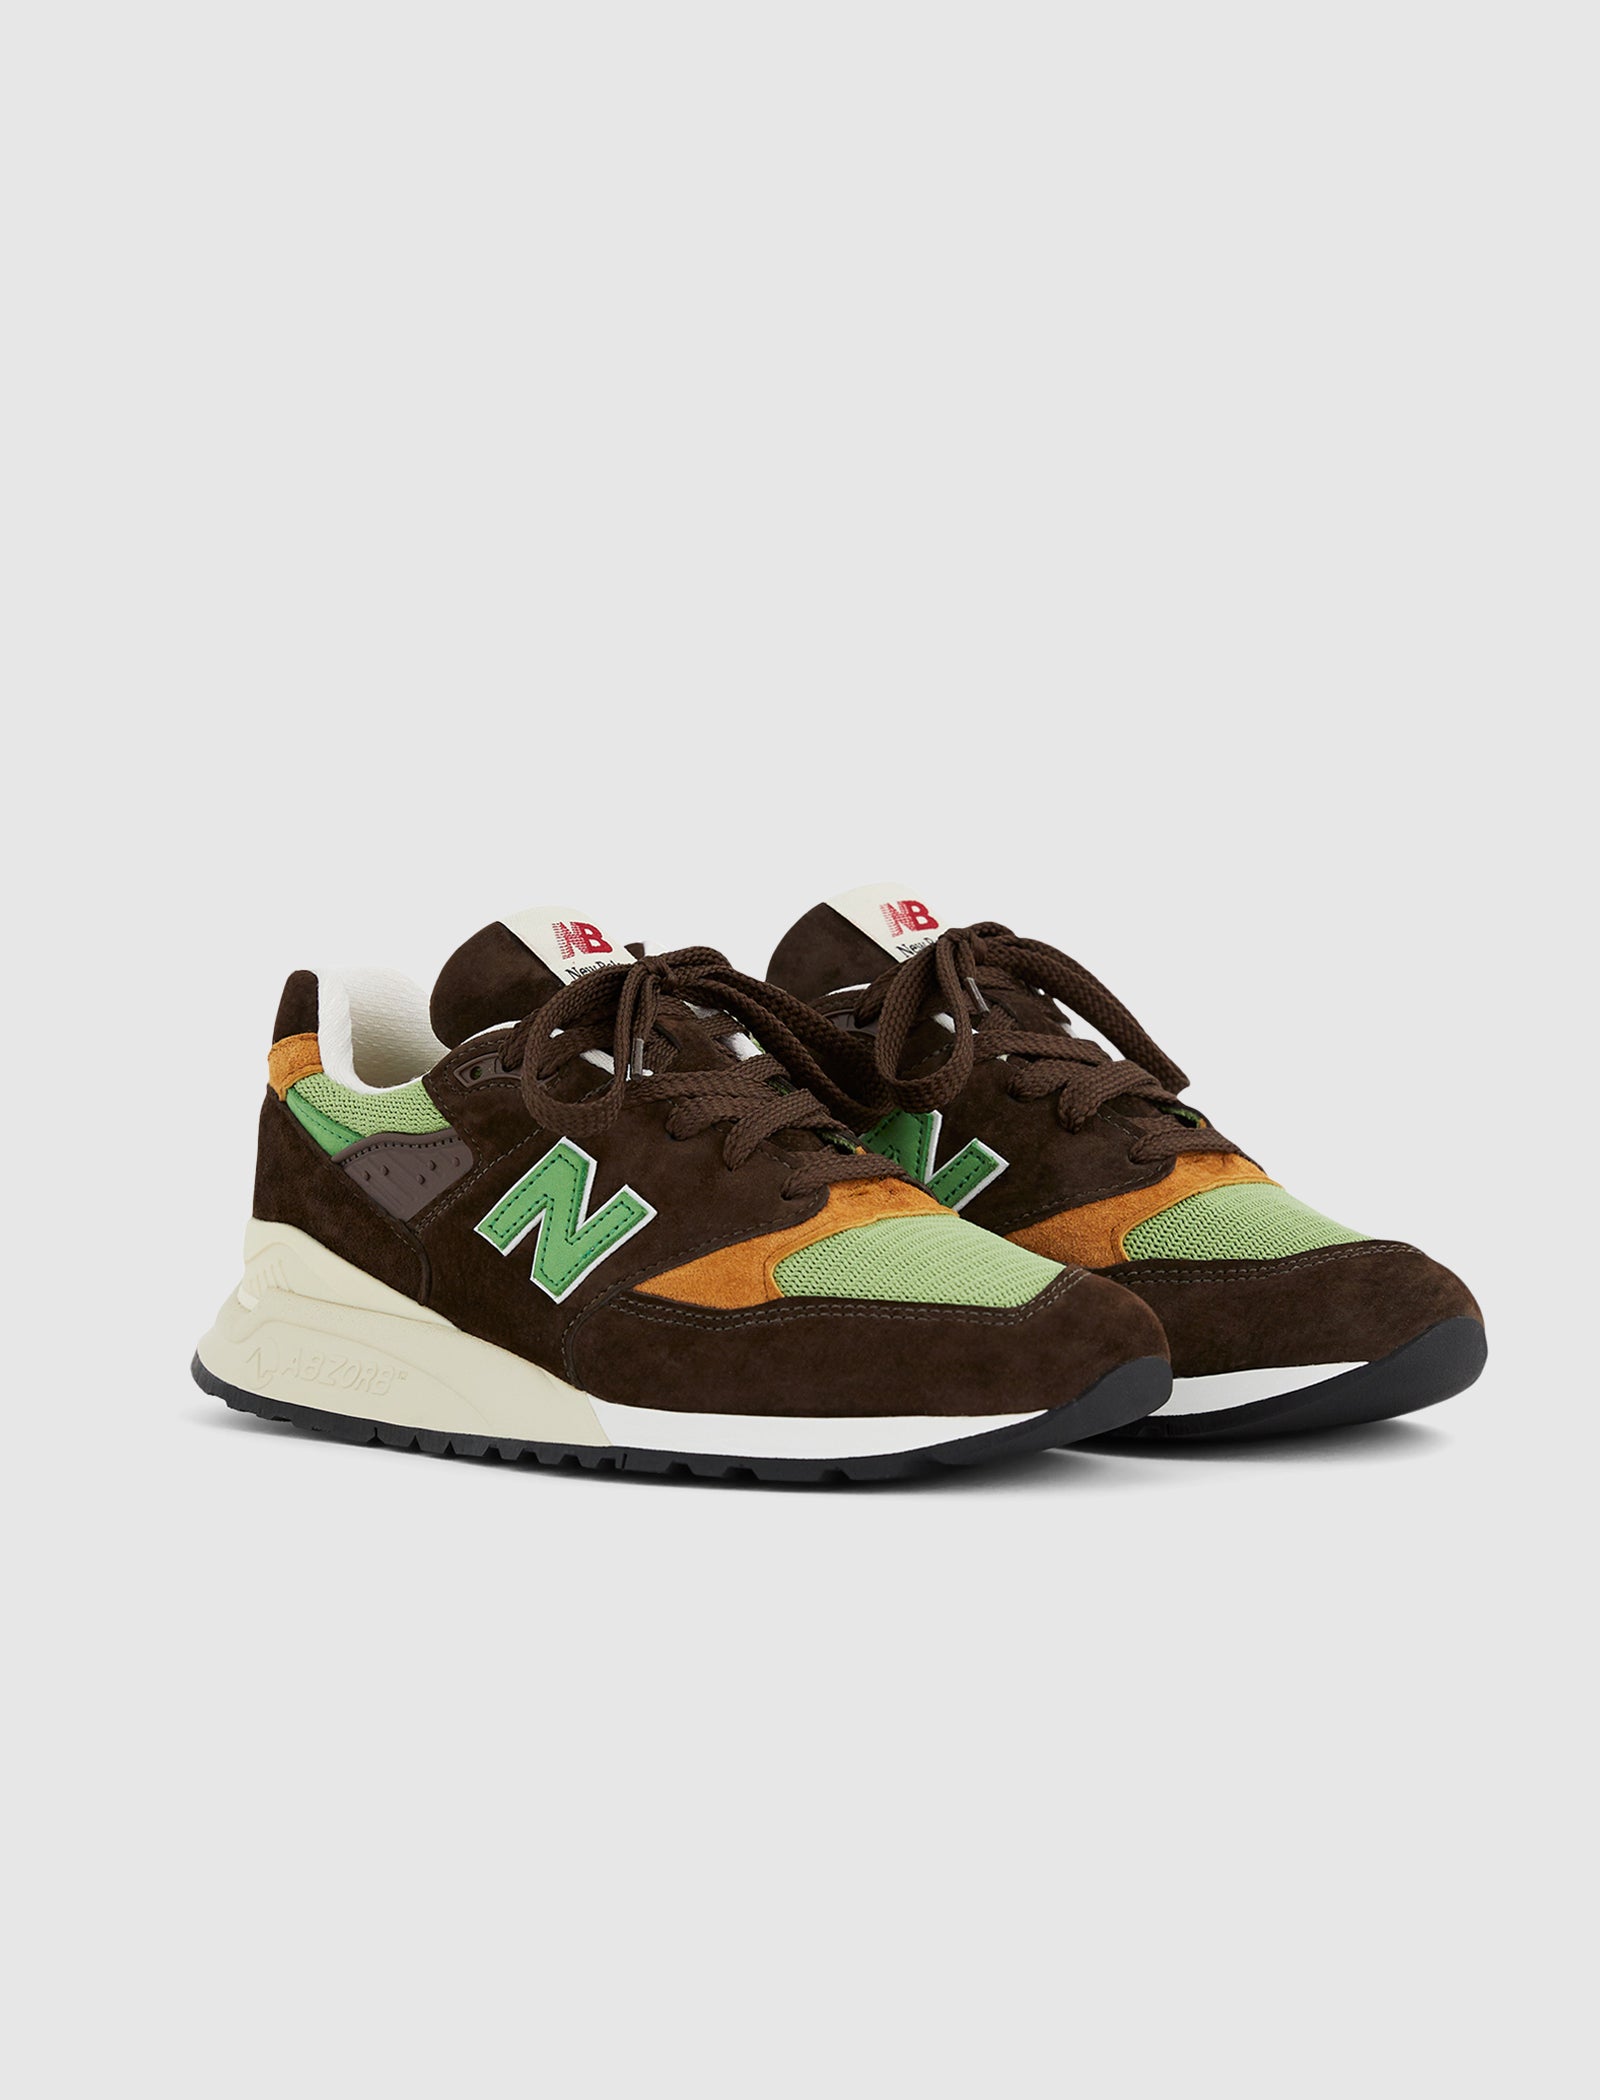 998 MADE IN USA "BROWN"